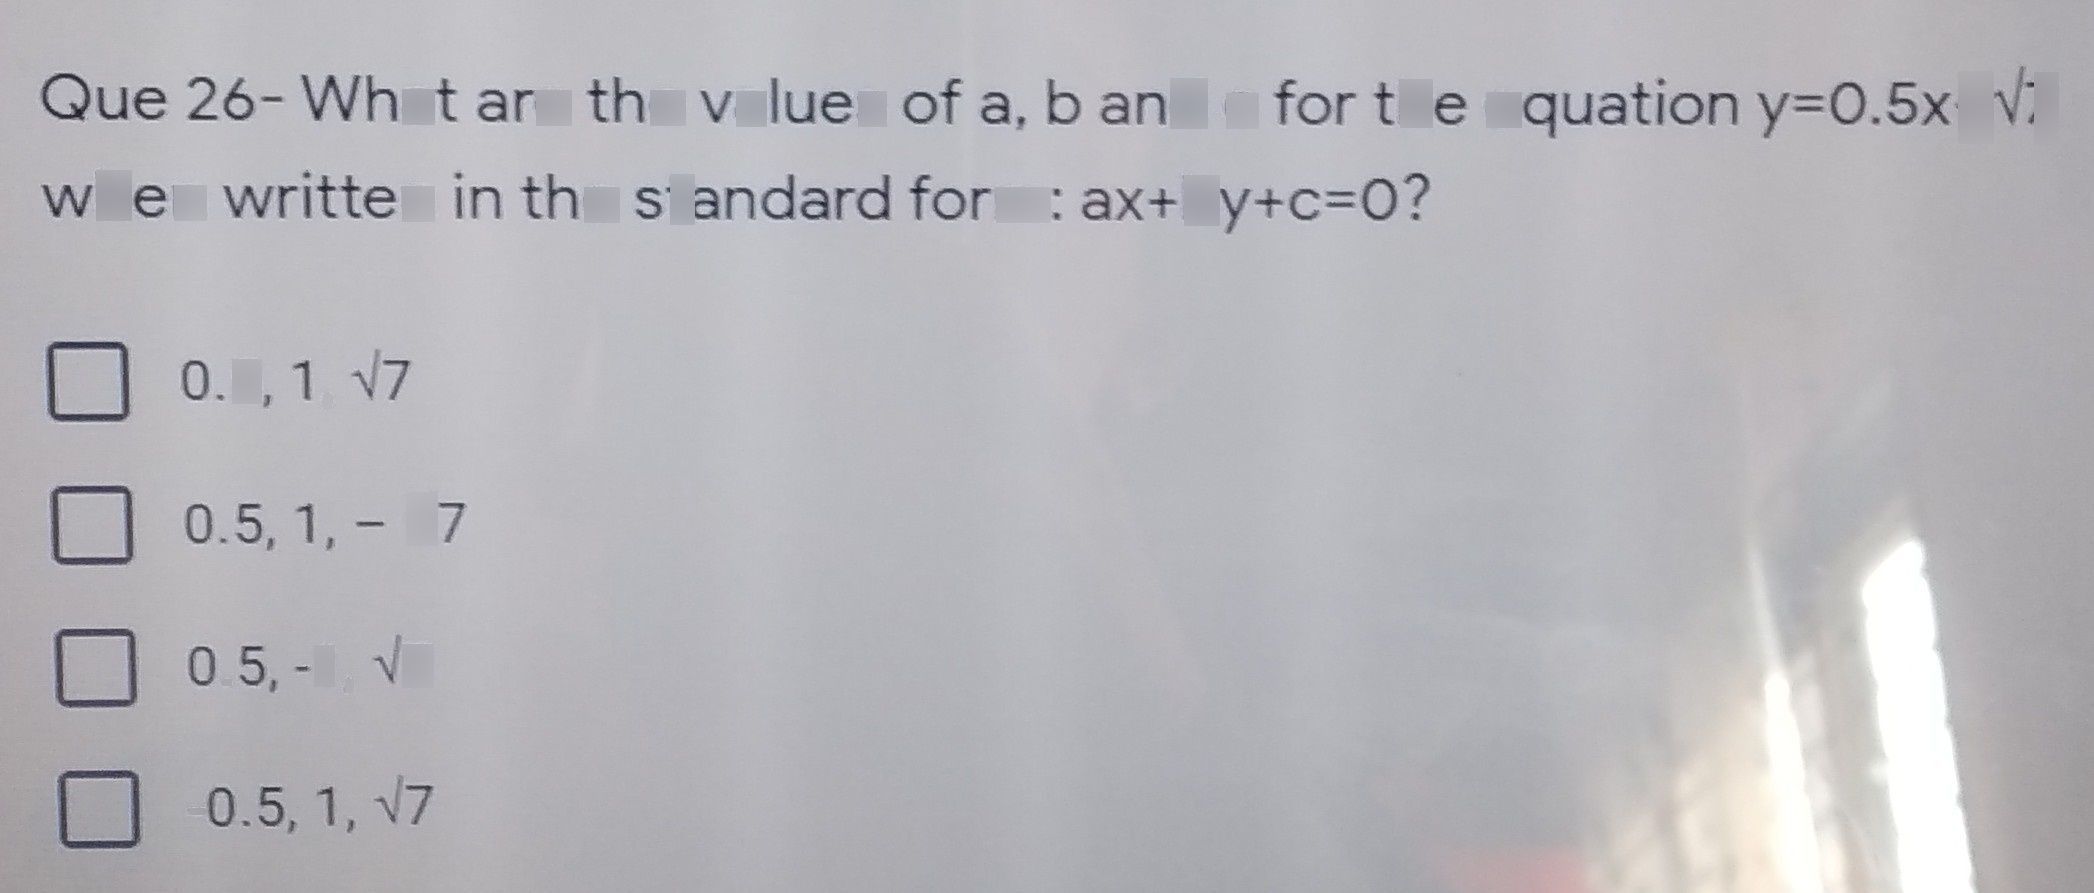 search-thumbnail-Que $26-$ What are the values of a, $b$ and $C$ for the equation $y=0.5x+\sqrt{7} $ 
when written in the standard $form$ $ax+by+c=07$ 
$0.5,1,\sqrt{7} $ 
$0.5,1,-\sqrt{7} $ 
$0.5,-1,\sqrt{7} $ 
$-0.5,1,$ $\sqrt{7} $ 